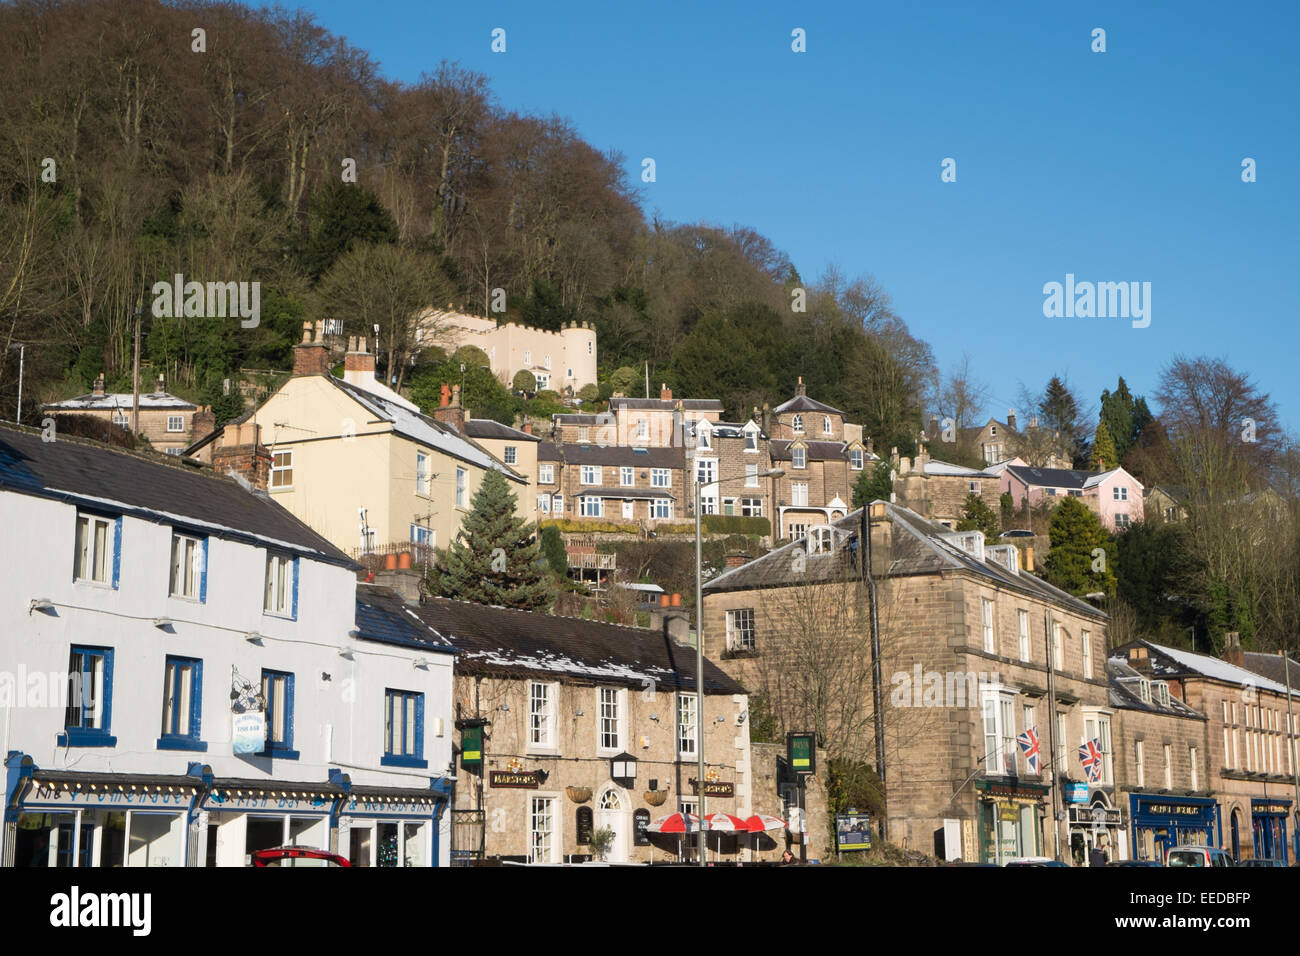 Matlock Spa town in the derbyshire dales,england Stock Photo